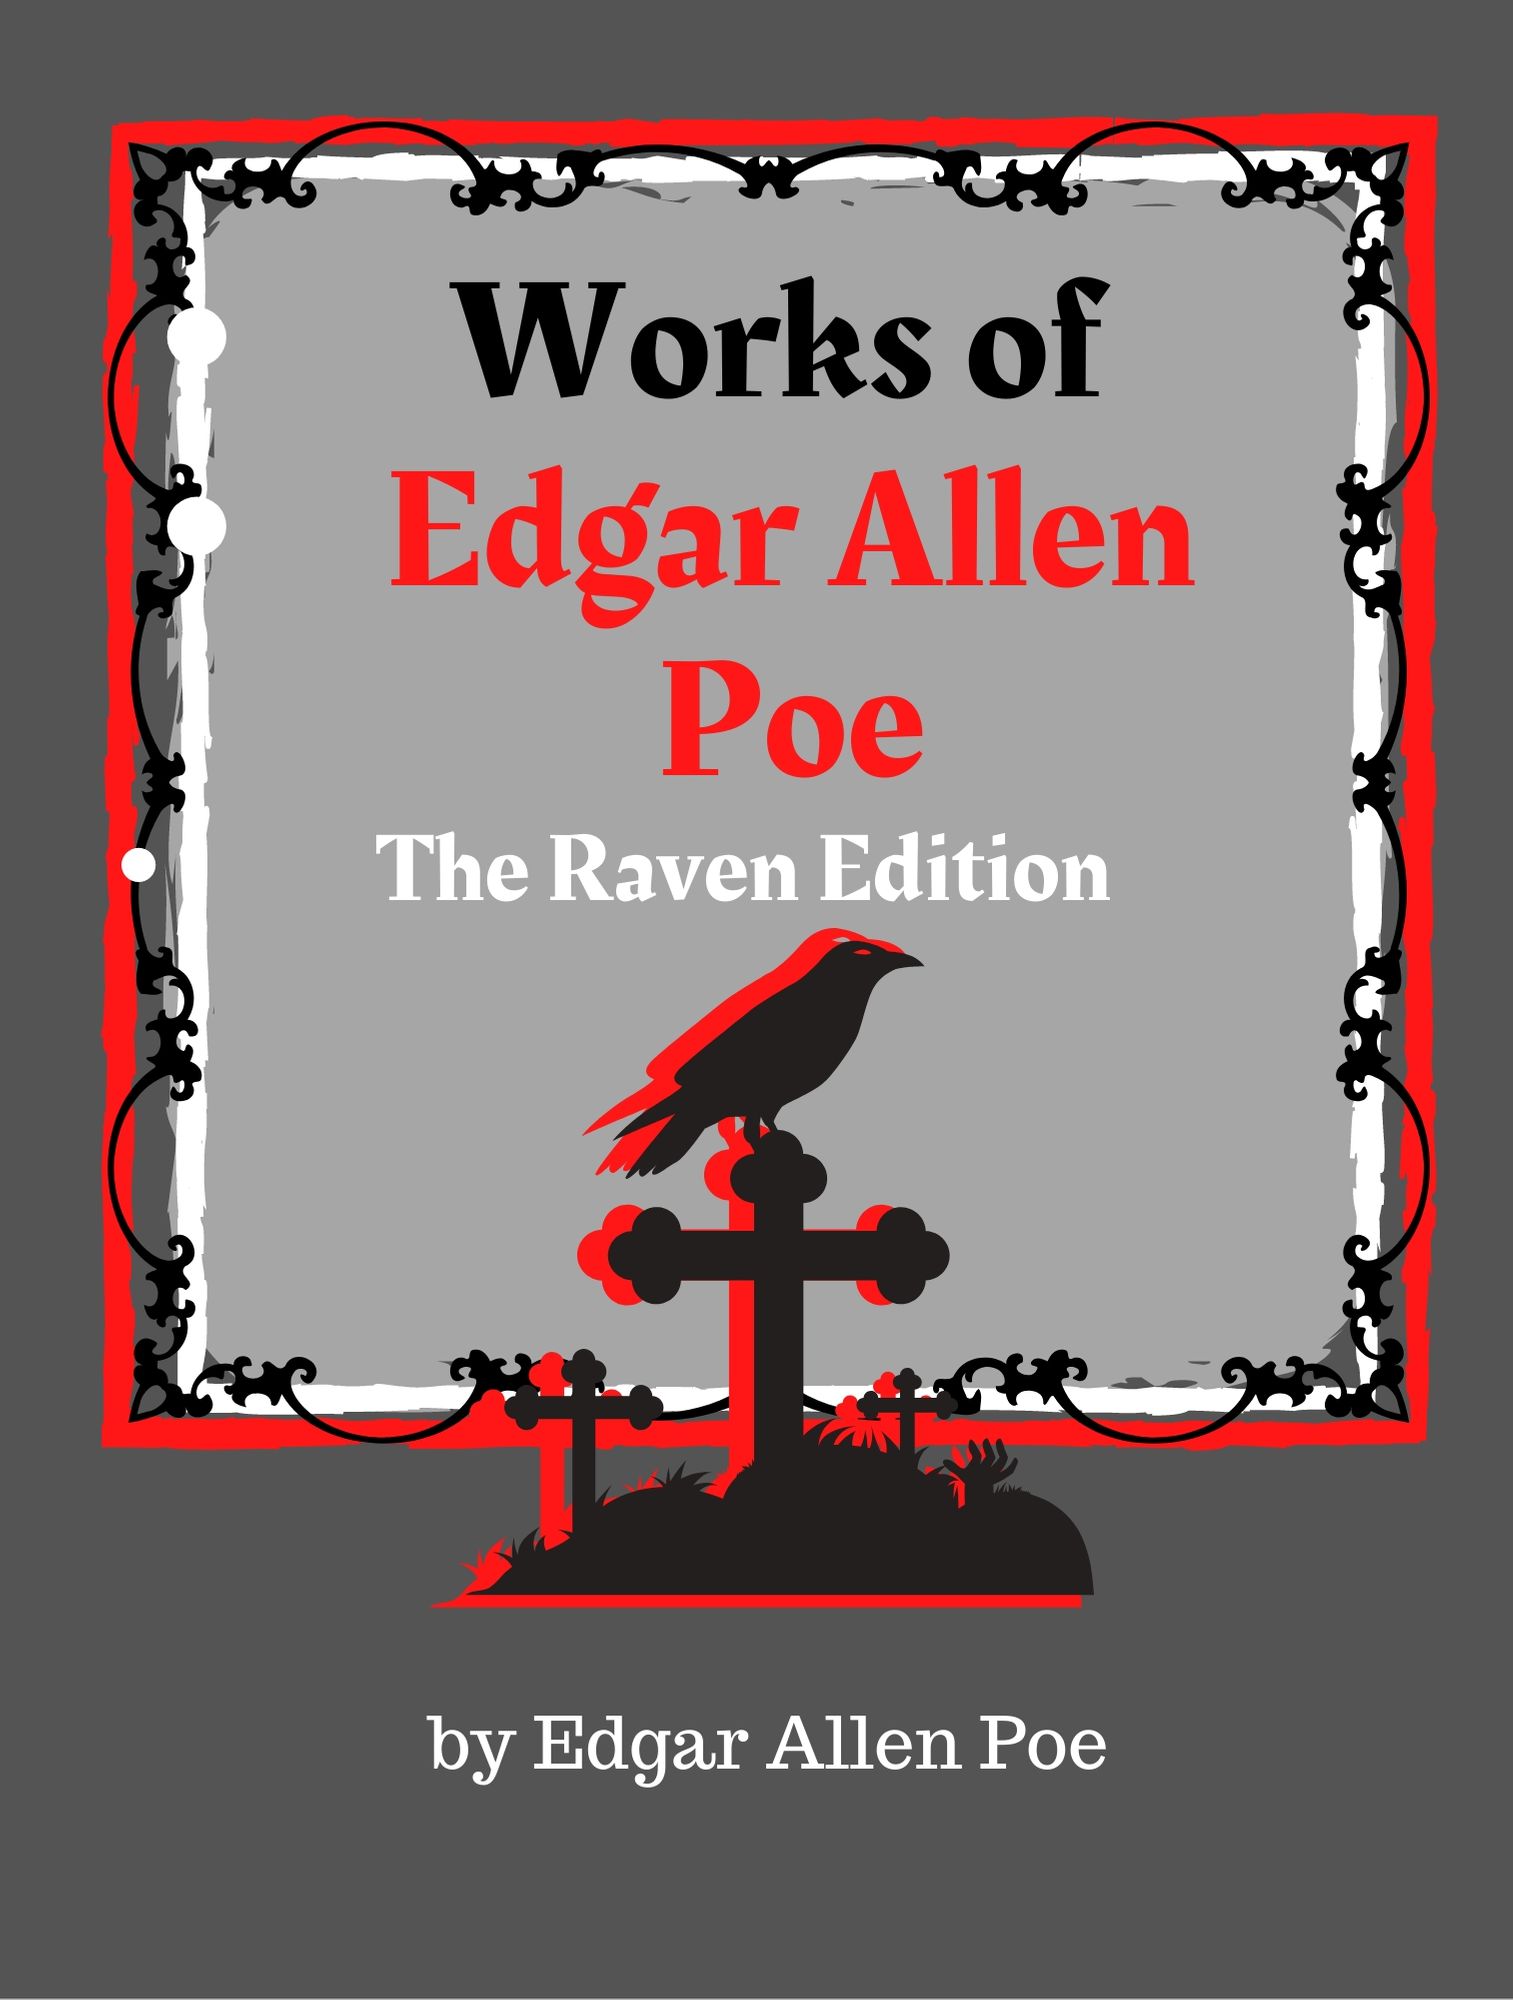 The Works of Edgar Allen Poe – The Raven Edition